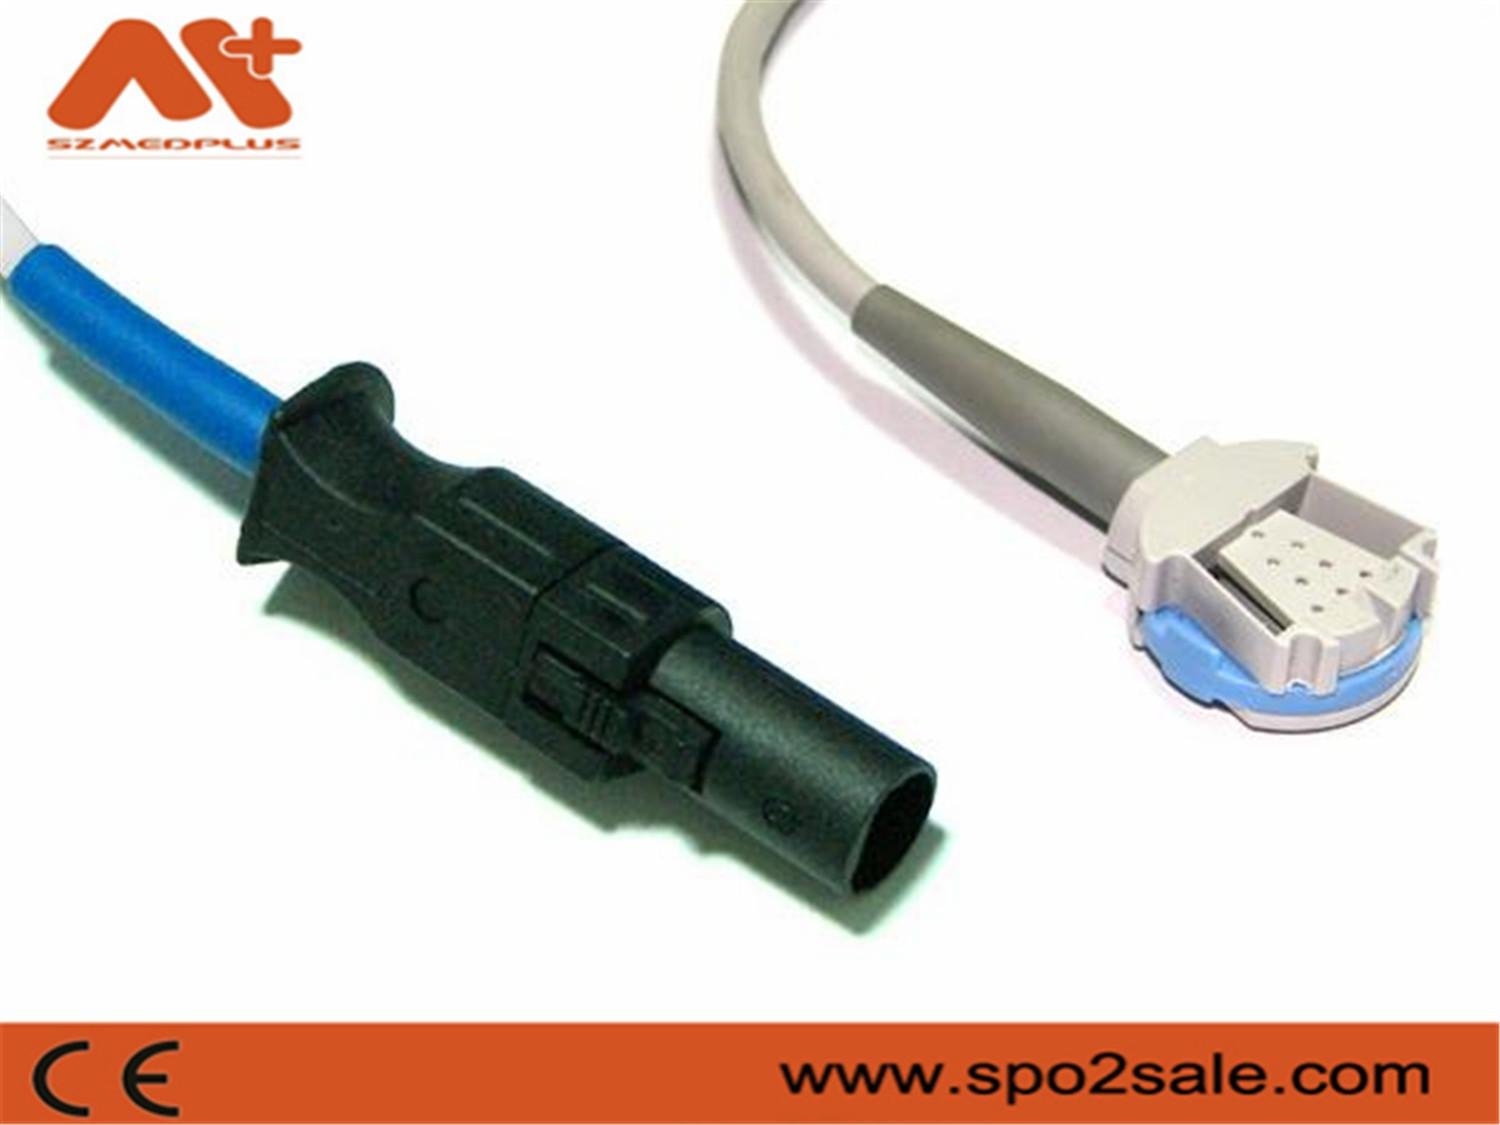 Datex－Ohmeda Spo2 Adapter Cable (OXY-OL3)